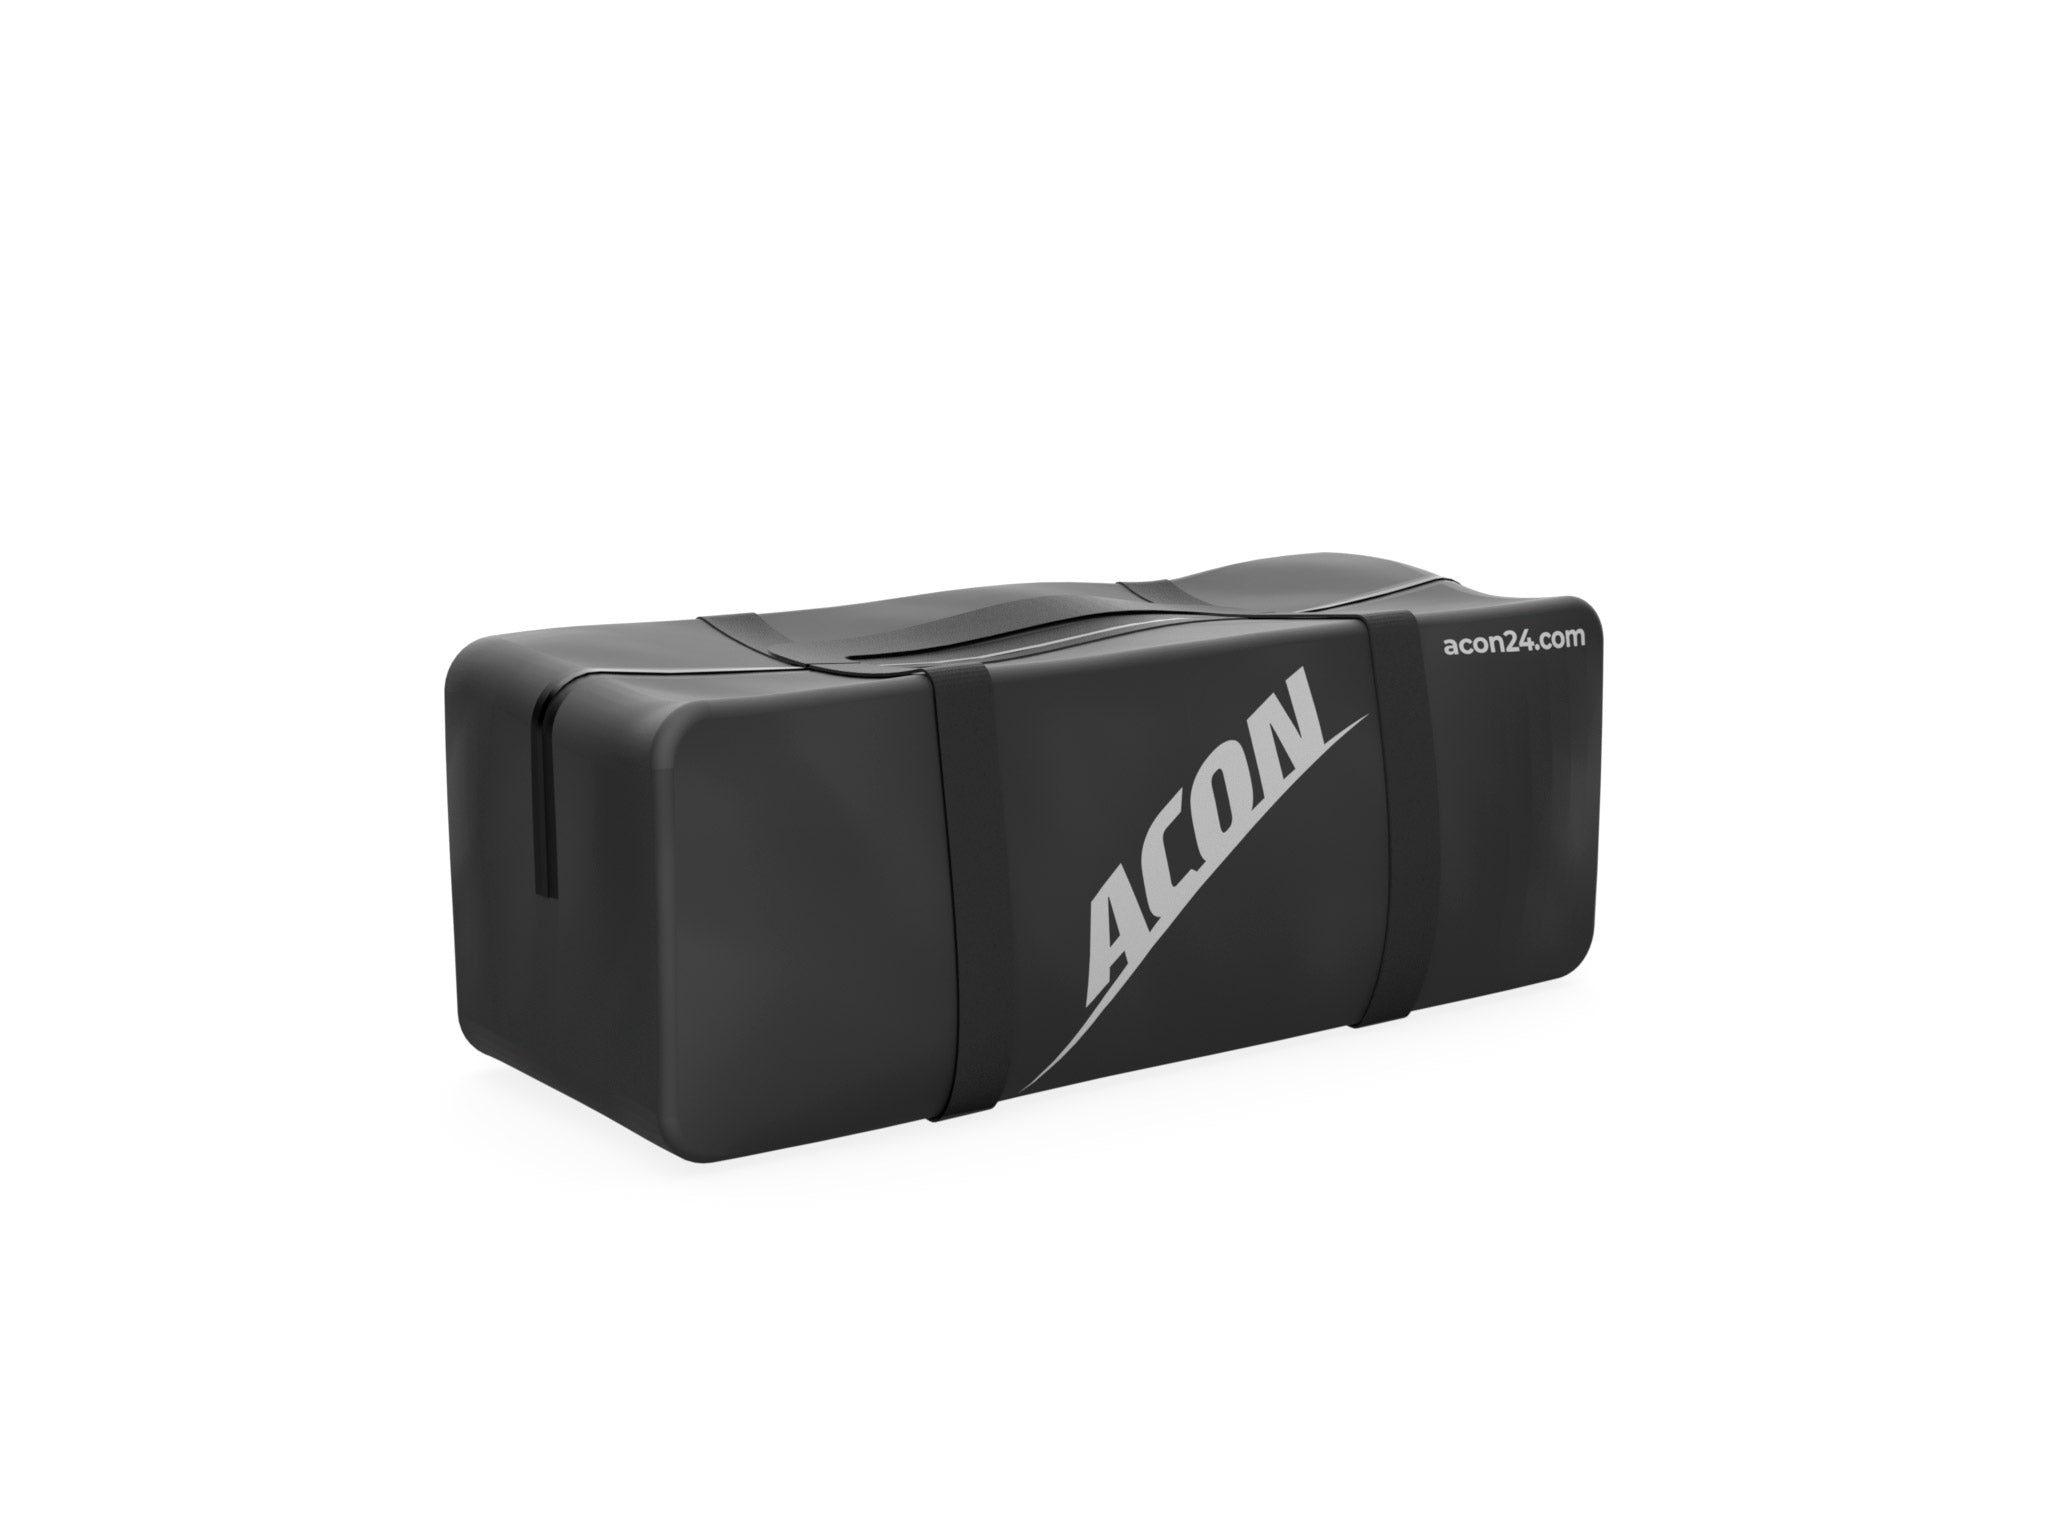 ACON AirTrack 3,0m and ACON AirBlock package comes with a carrying bag